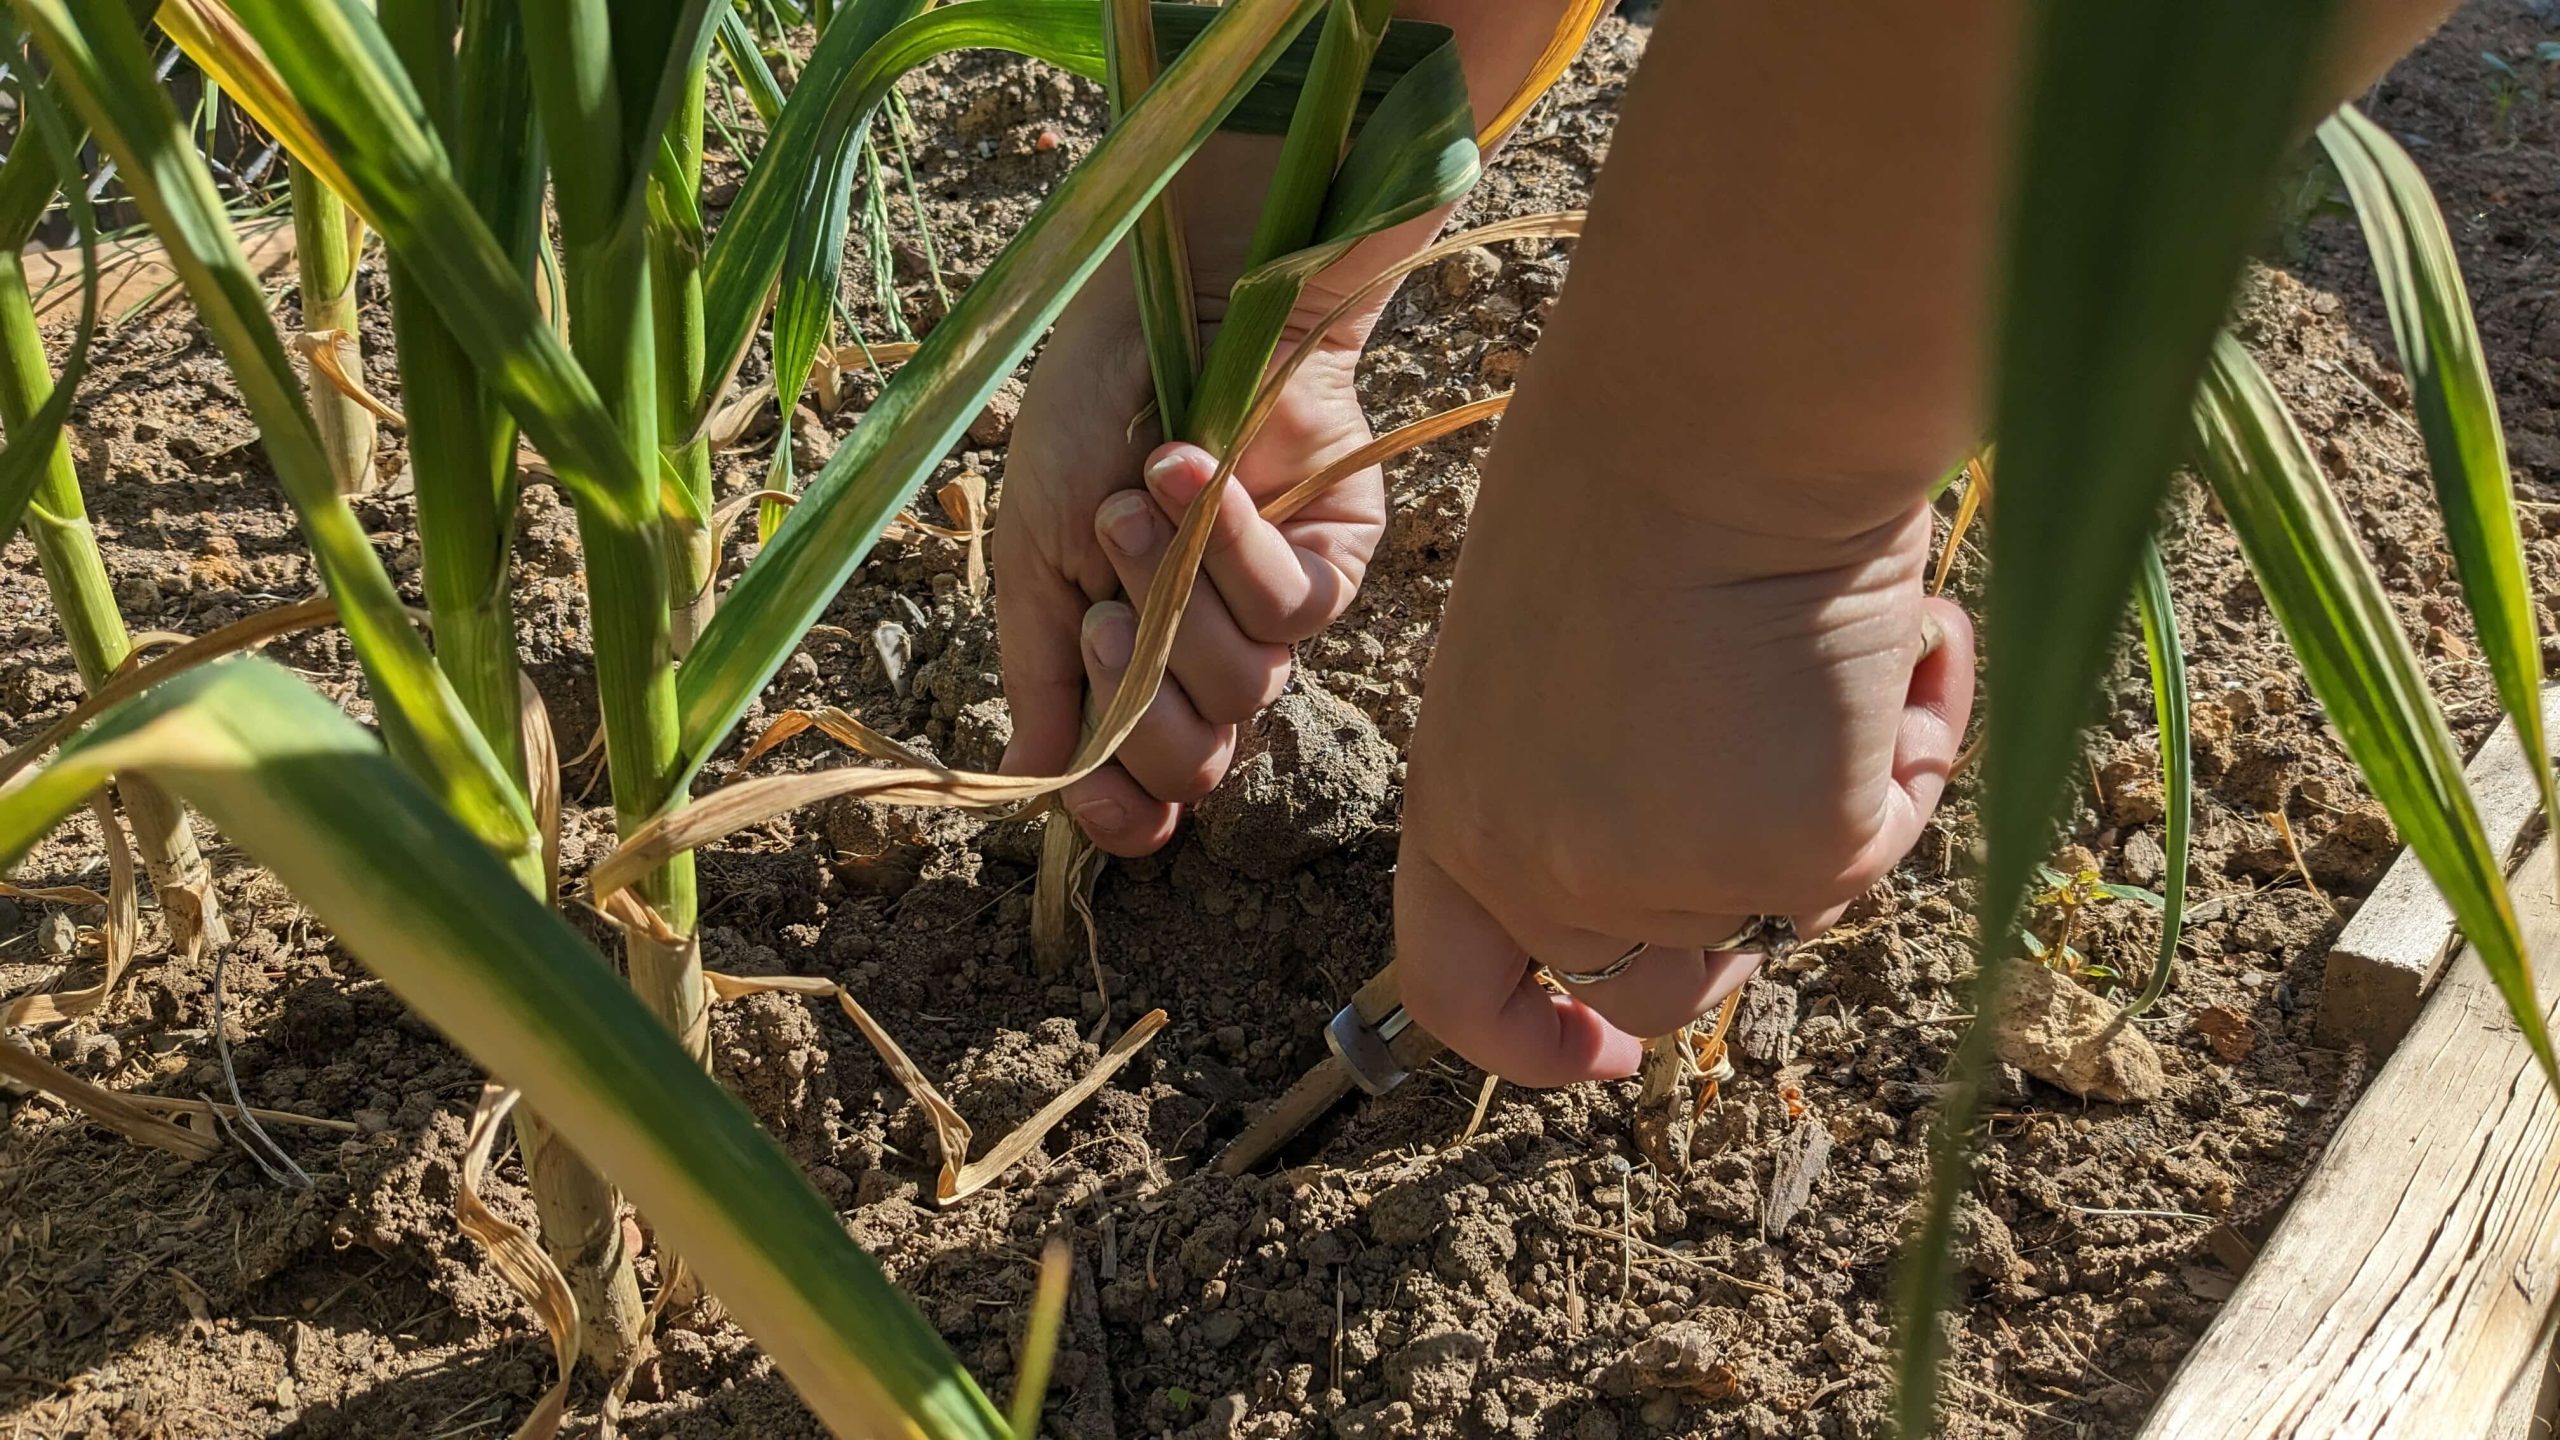 woman pulling a stalk of garlic out of dirt